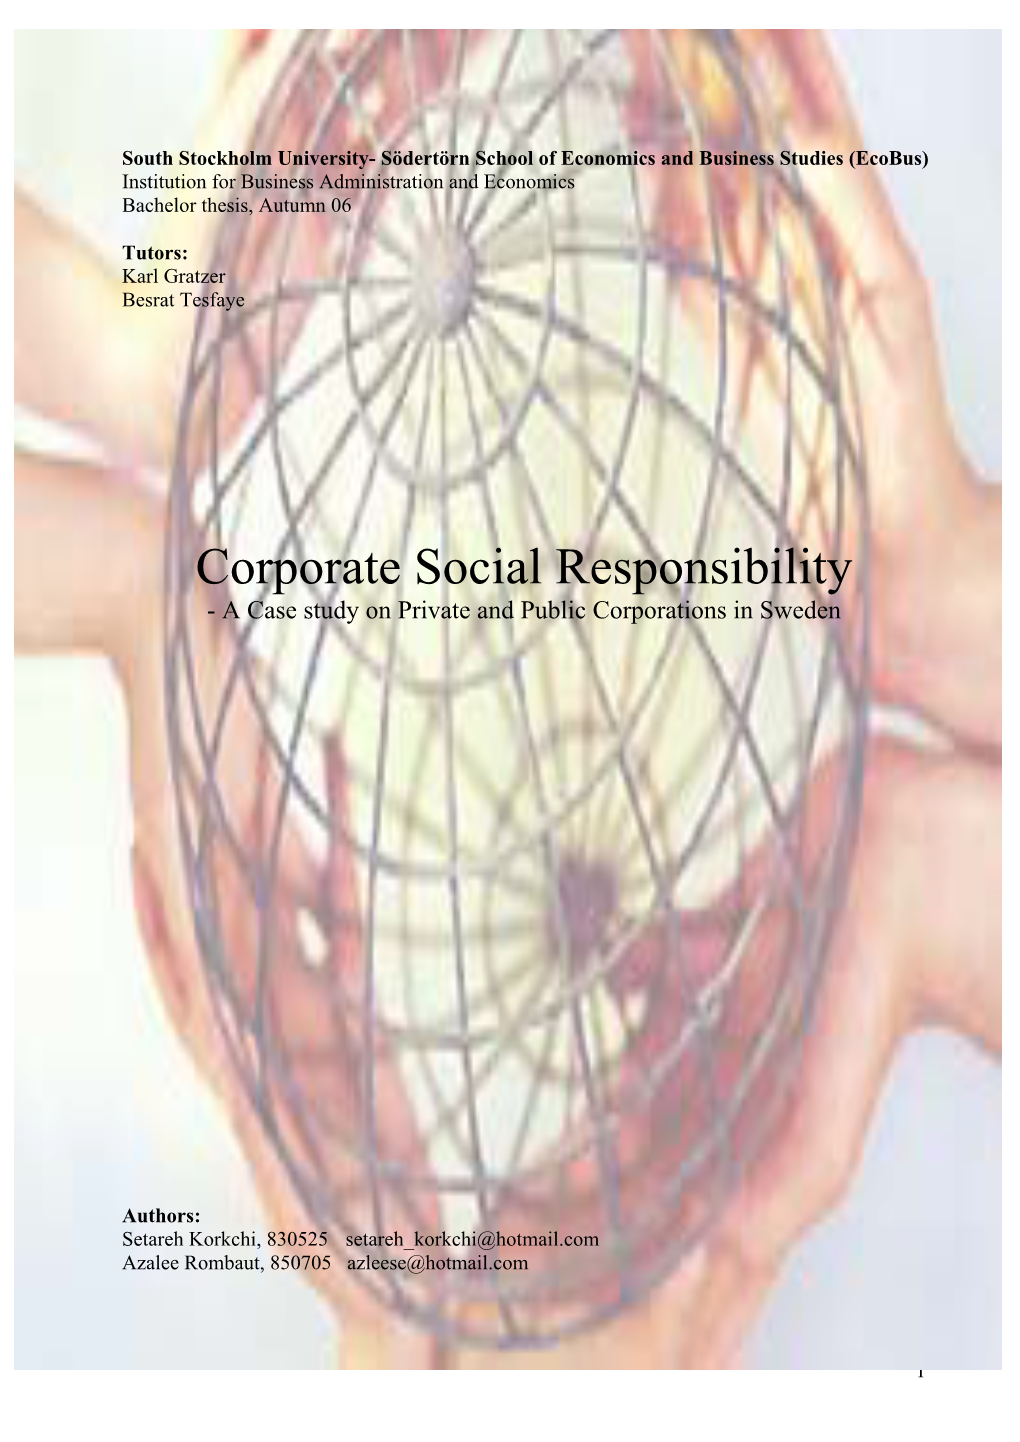 Corporate Social Responsibility - a Case Study on Private and Public Corporations in Sweden